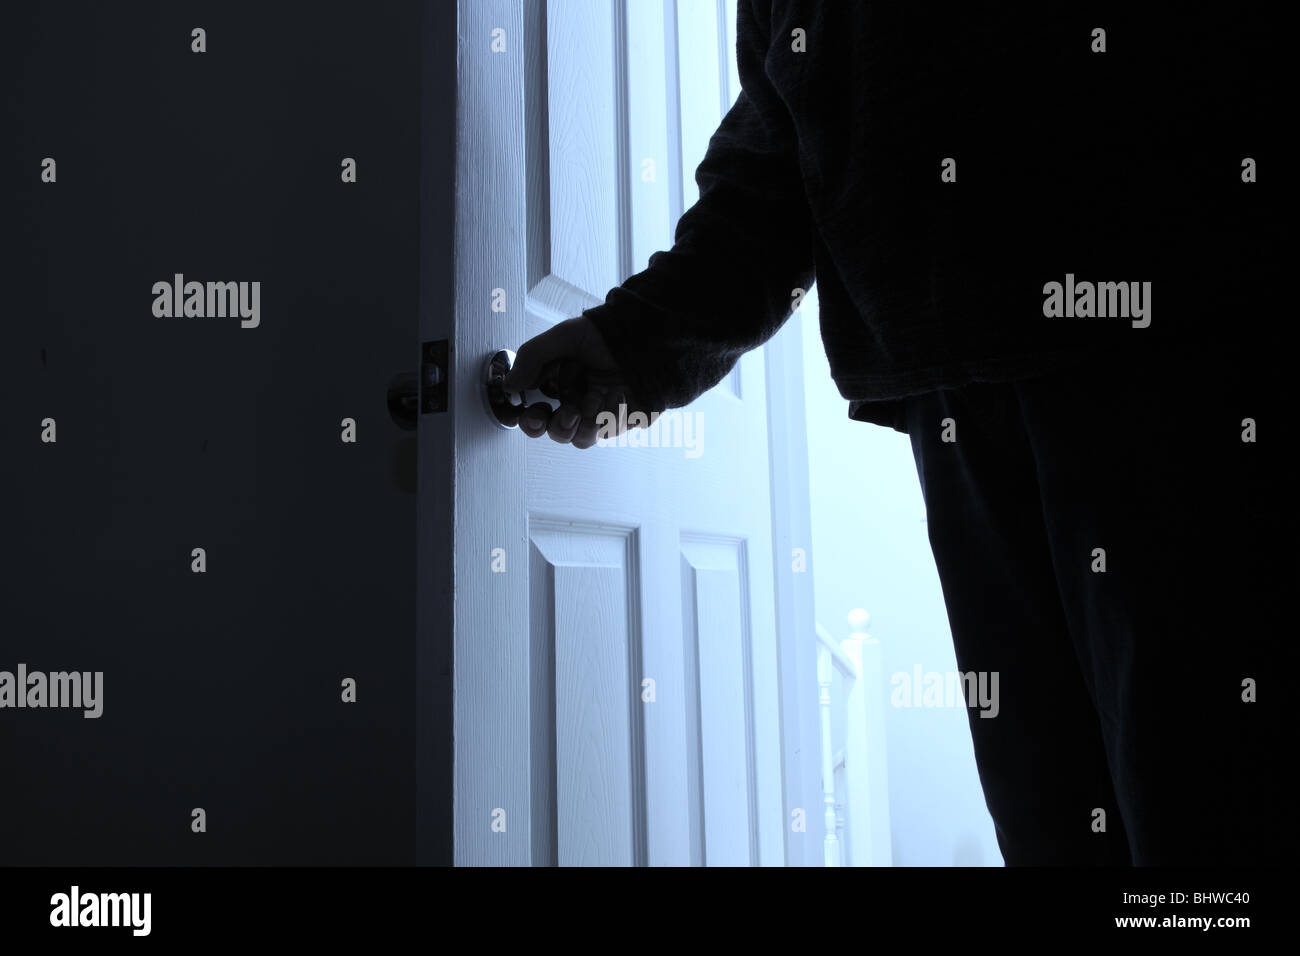 Man's hand turning the door handle, as he enters a dark room Stock Photo